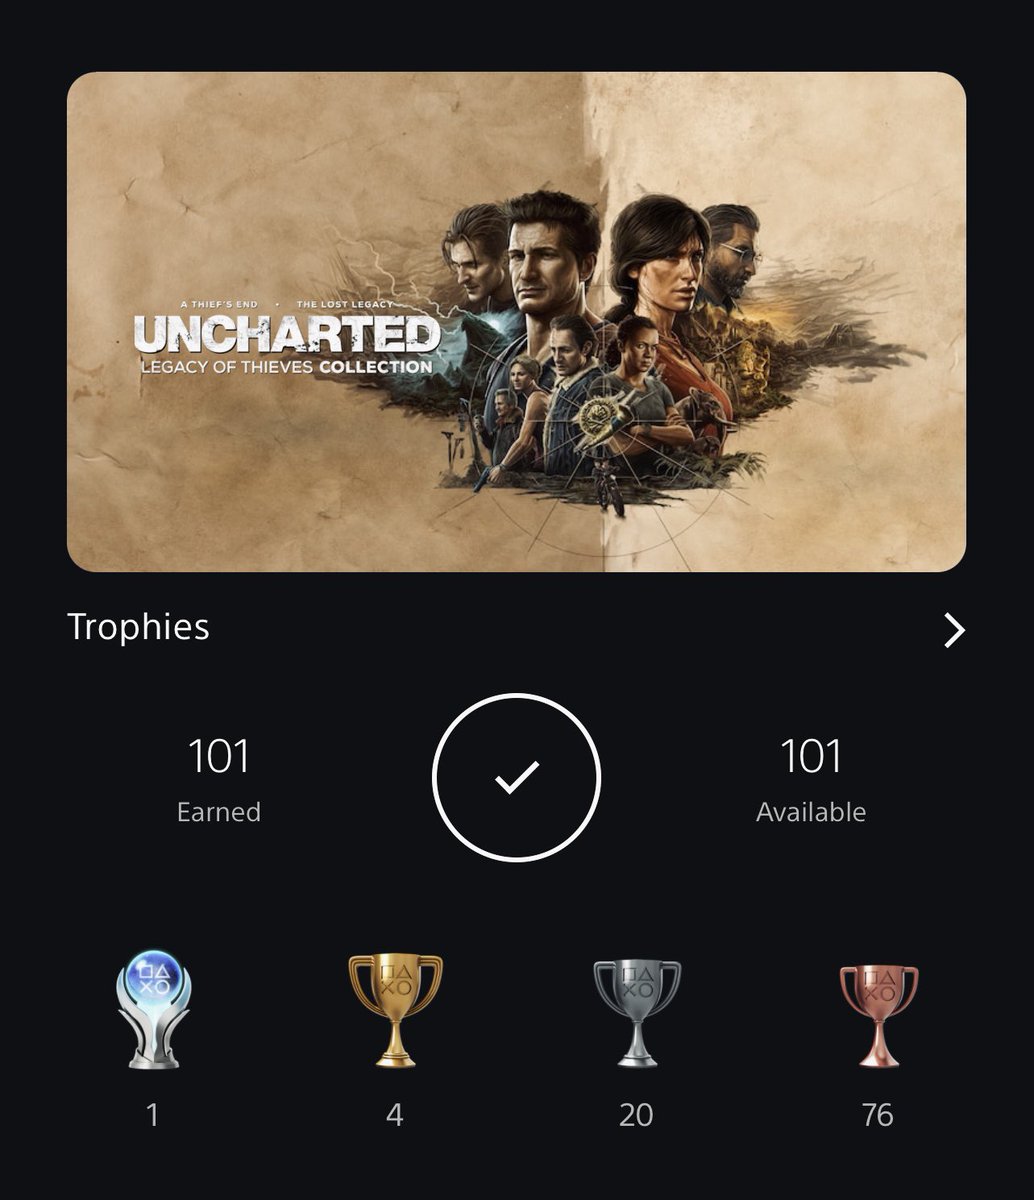 One of the best franchises in the gaming history.
Sic Parvis Magna.
Great job @Naughty_Dog!

#Uncharted #PlayStation #TrophyHunting https://t.co/9tOIWvcX1P